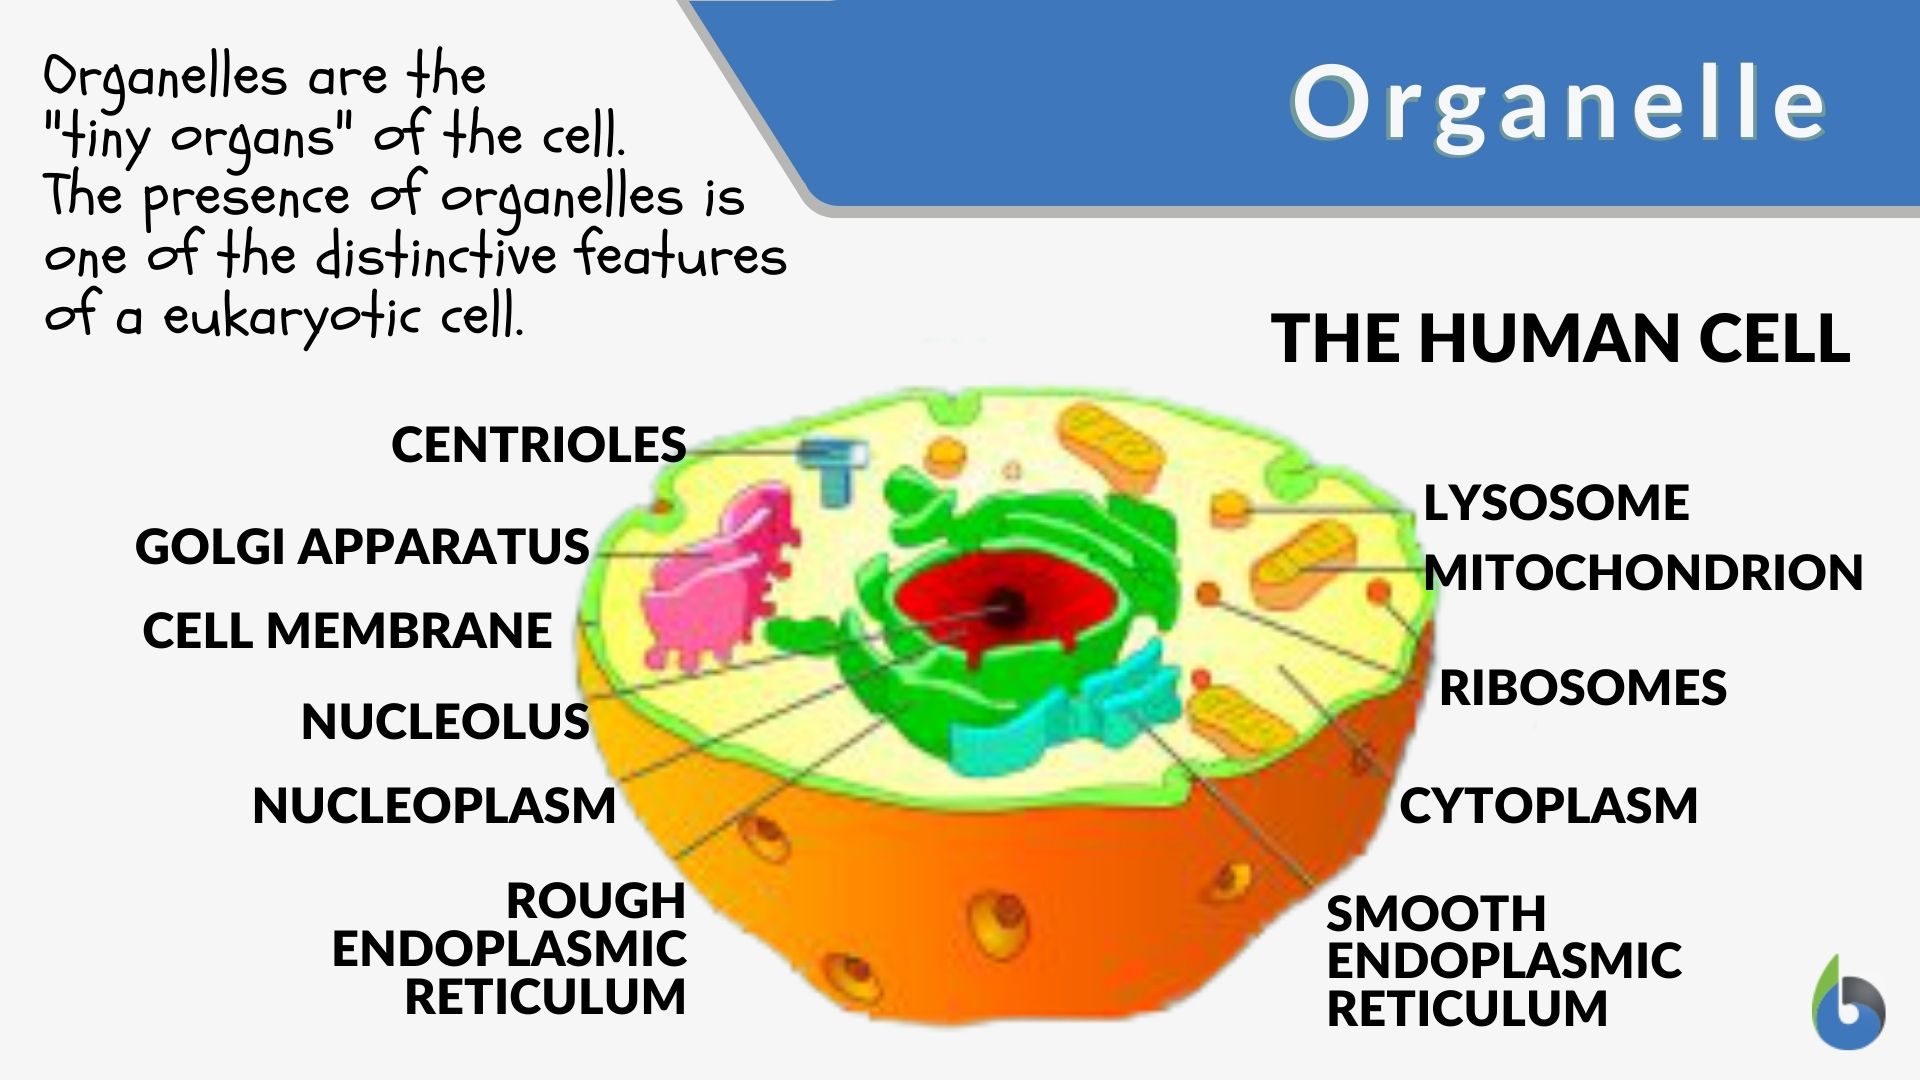 Organelle - Definition and Examples - Biology Online Dictionary